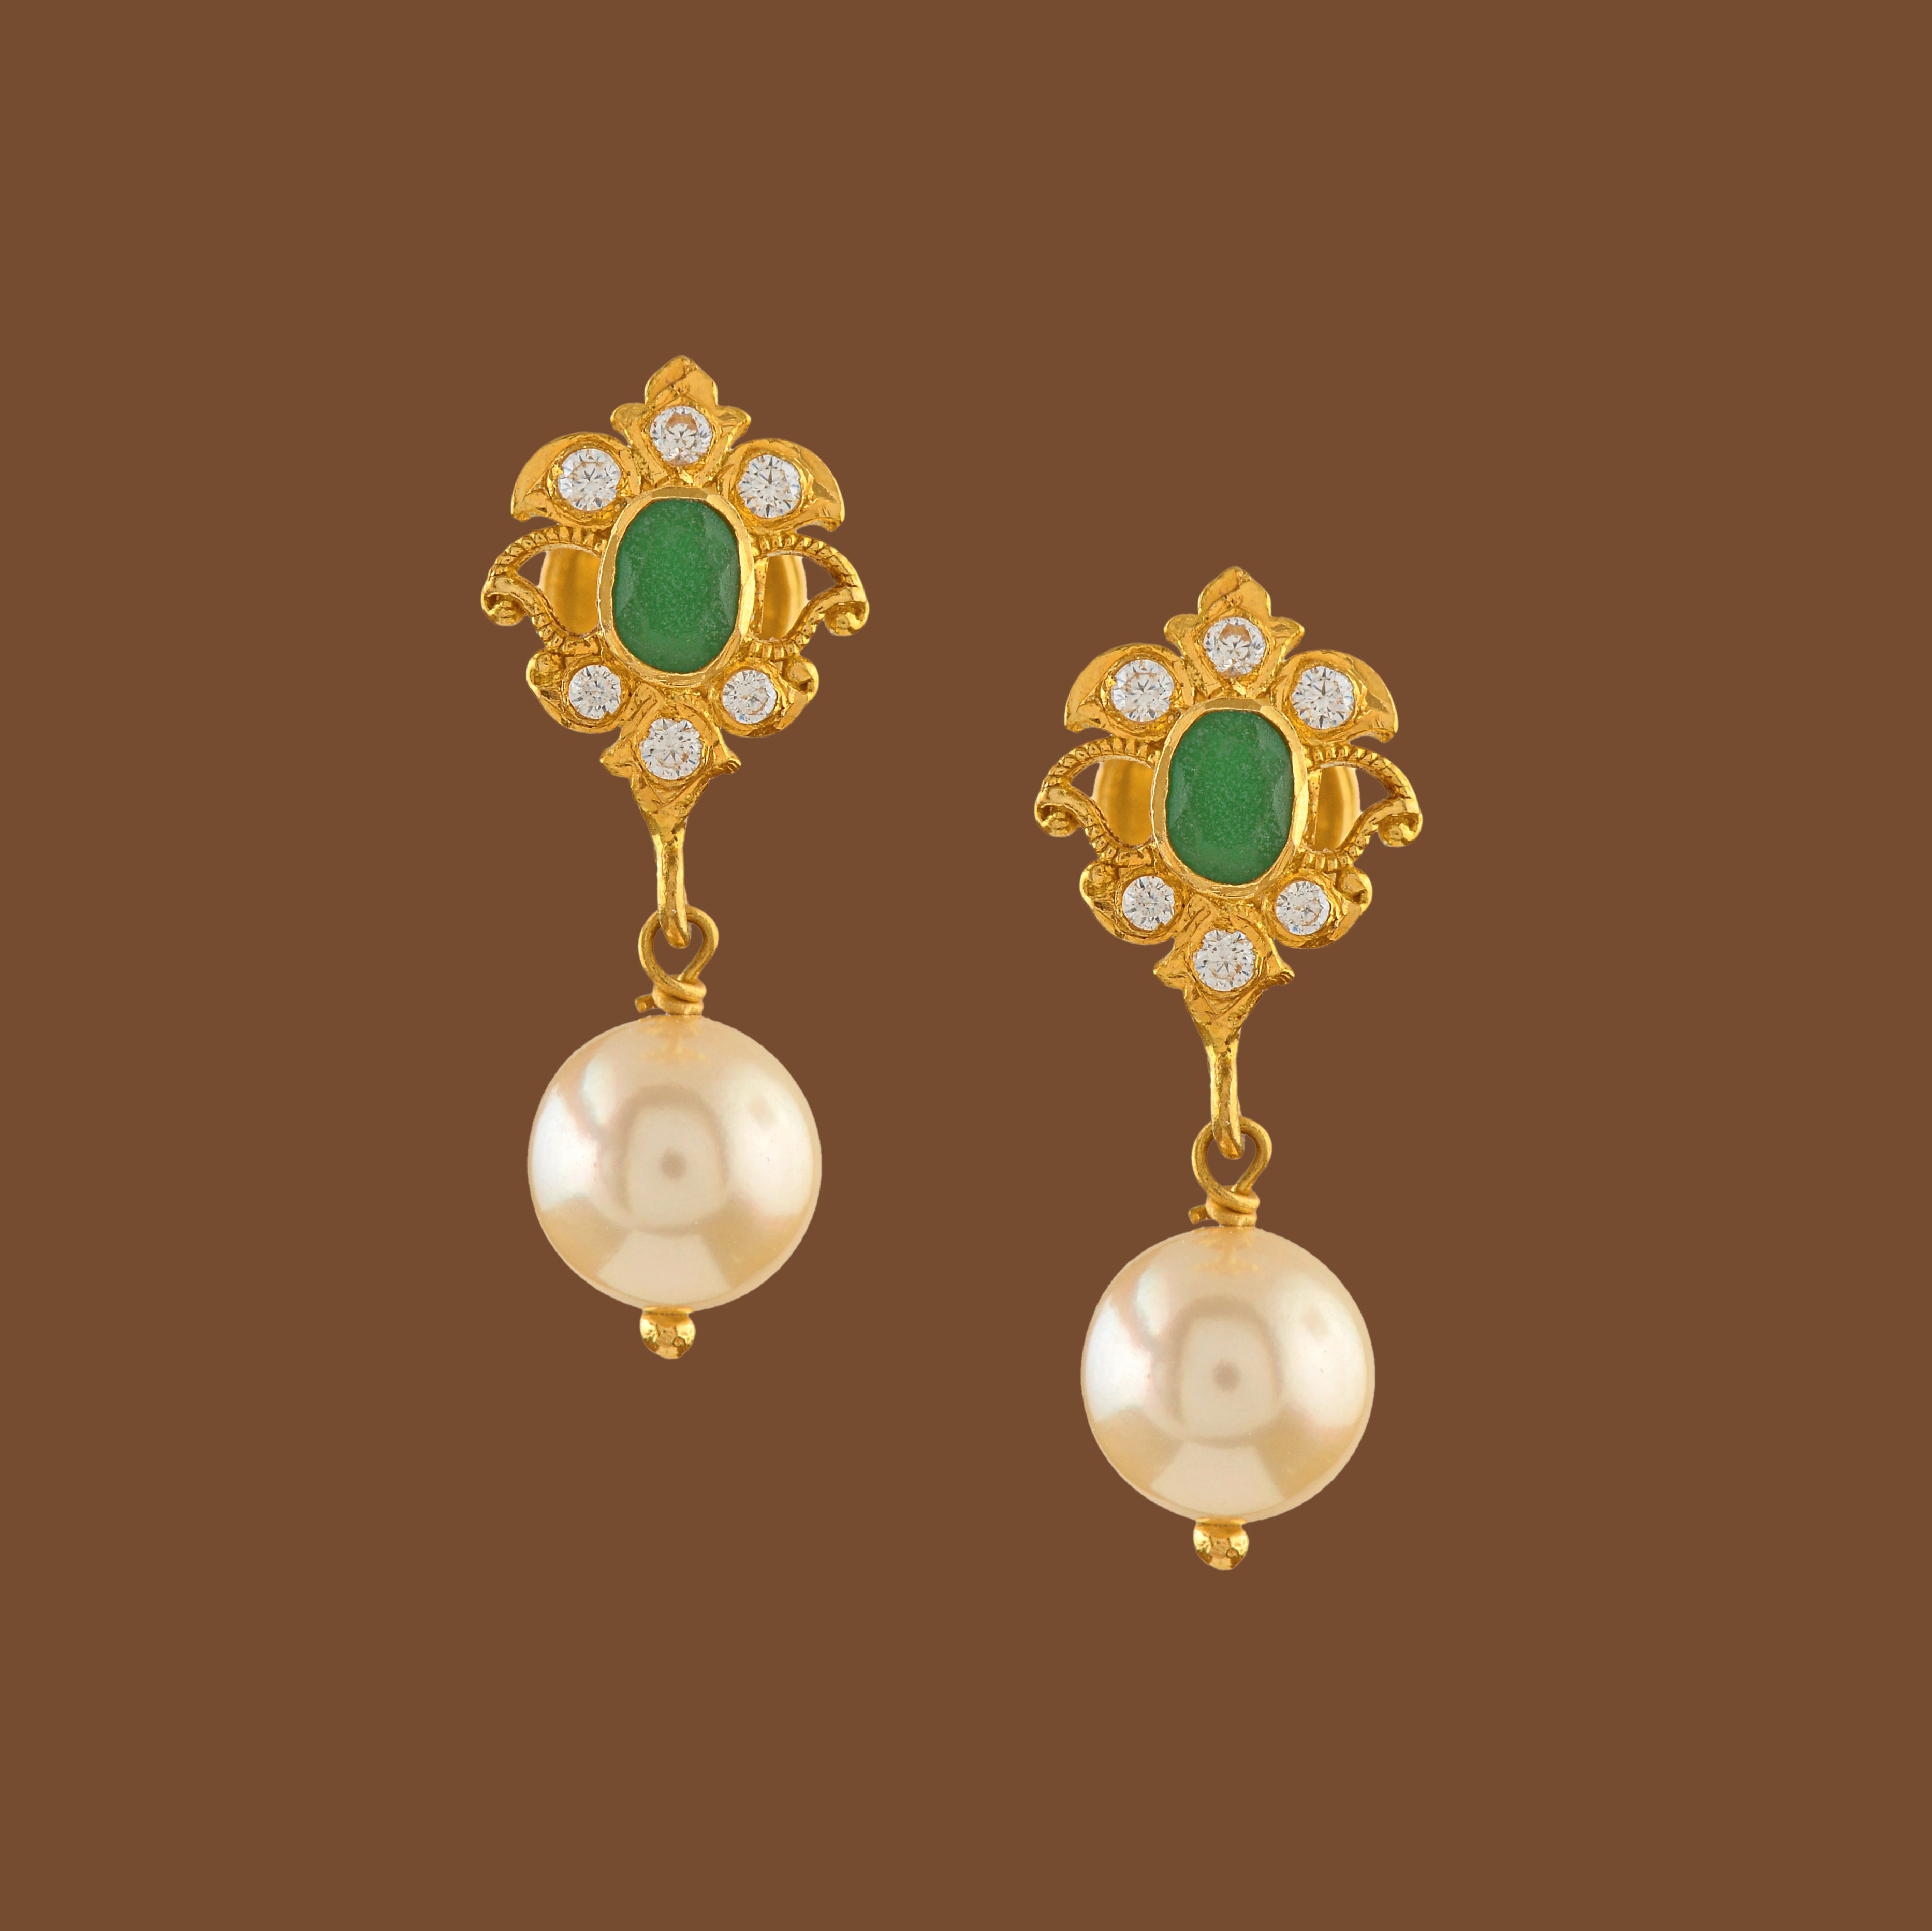 22K Gold Earrings With Pearl Hanging